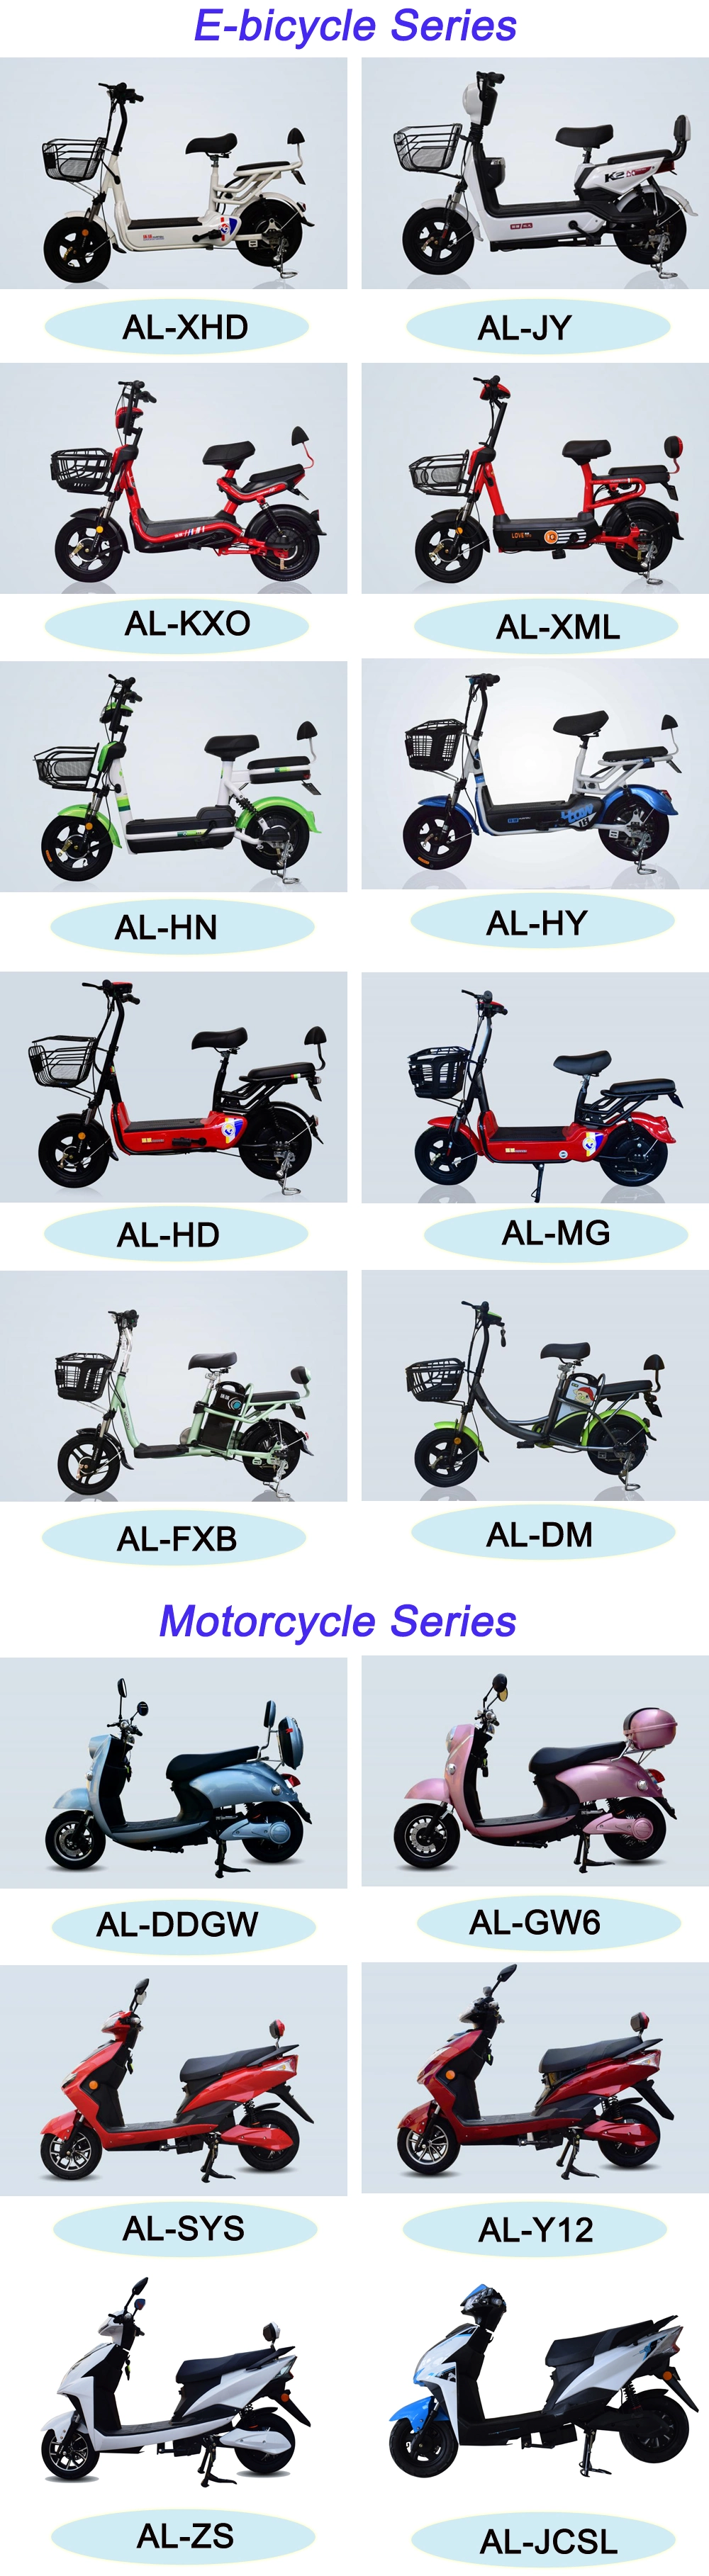 Al-Gw6 Adult Best Electric Motorcycle Electric Chopper Motorcycle for Sale